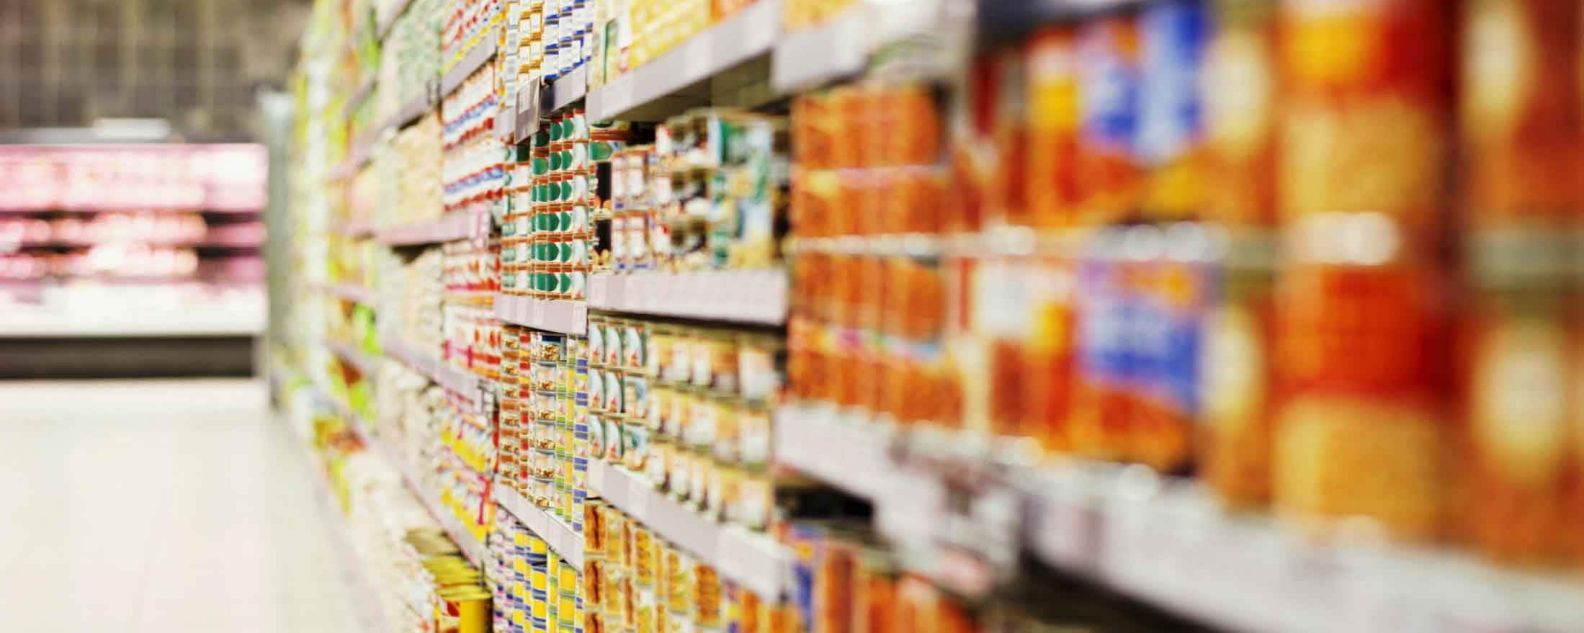 Blurred line of canned goods on grocery aisle